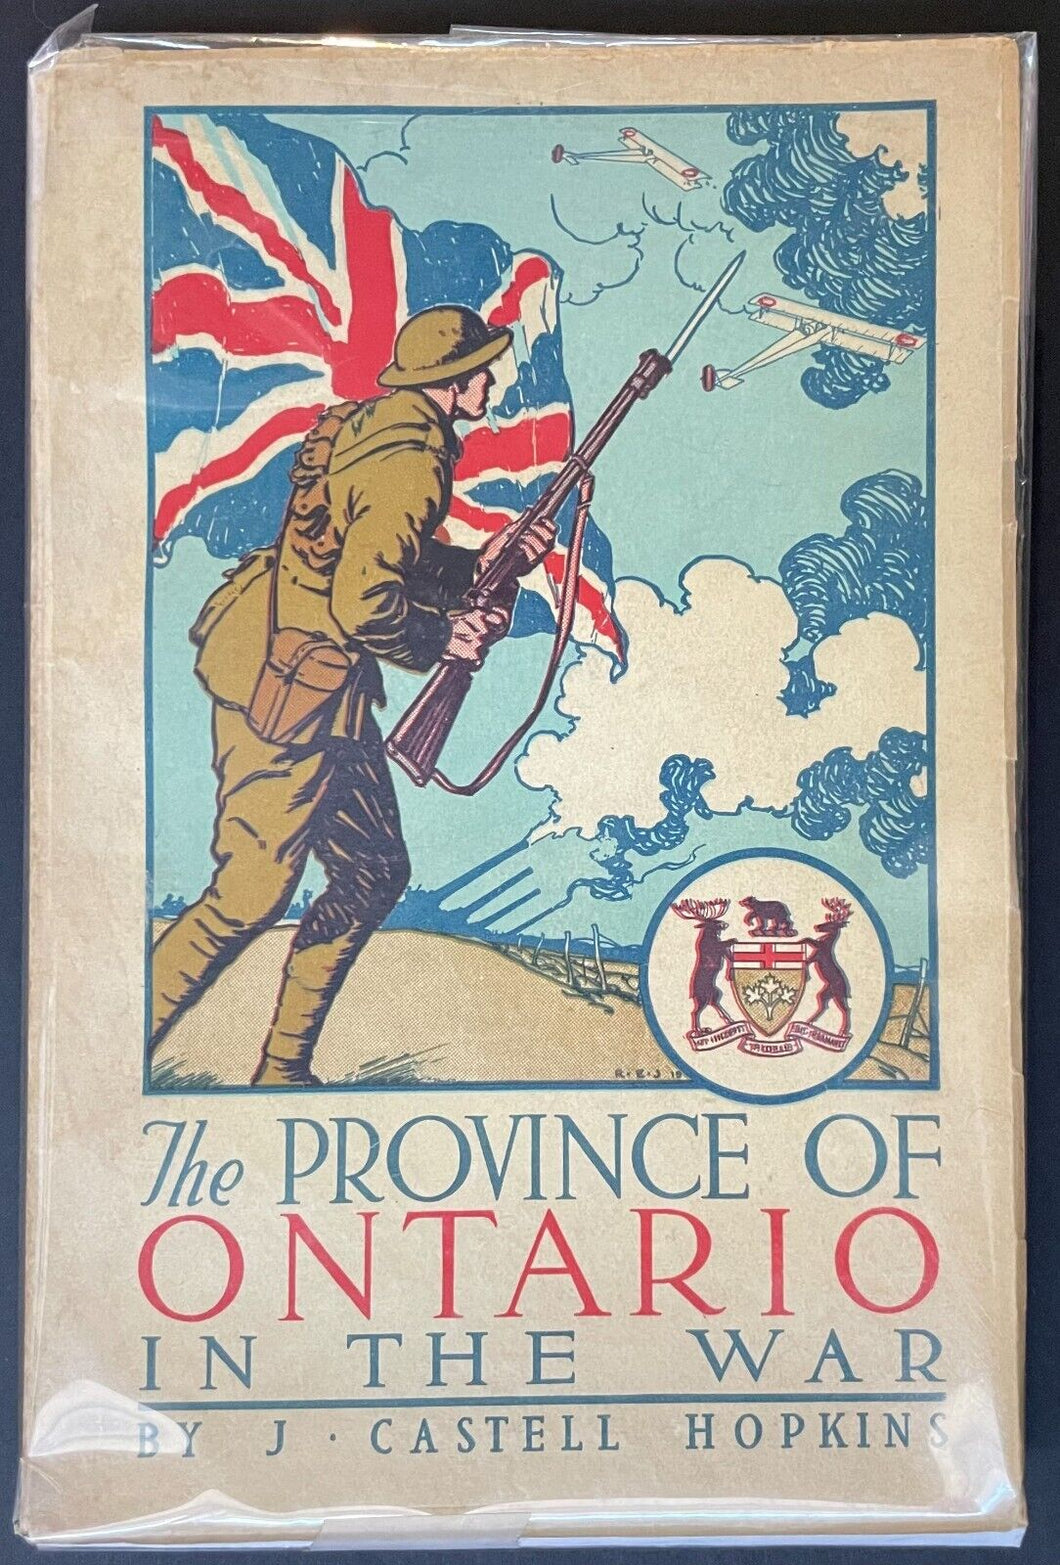 1919 The Province Of Ontario In The War Autographed J. Castell Hopkins Book